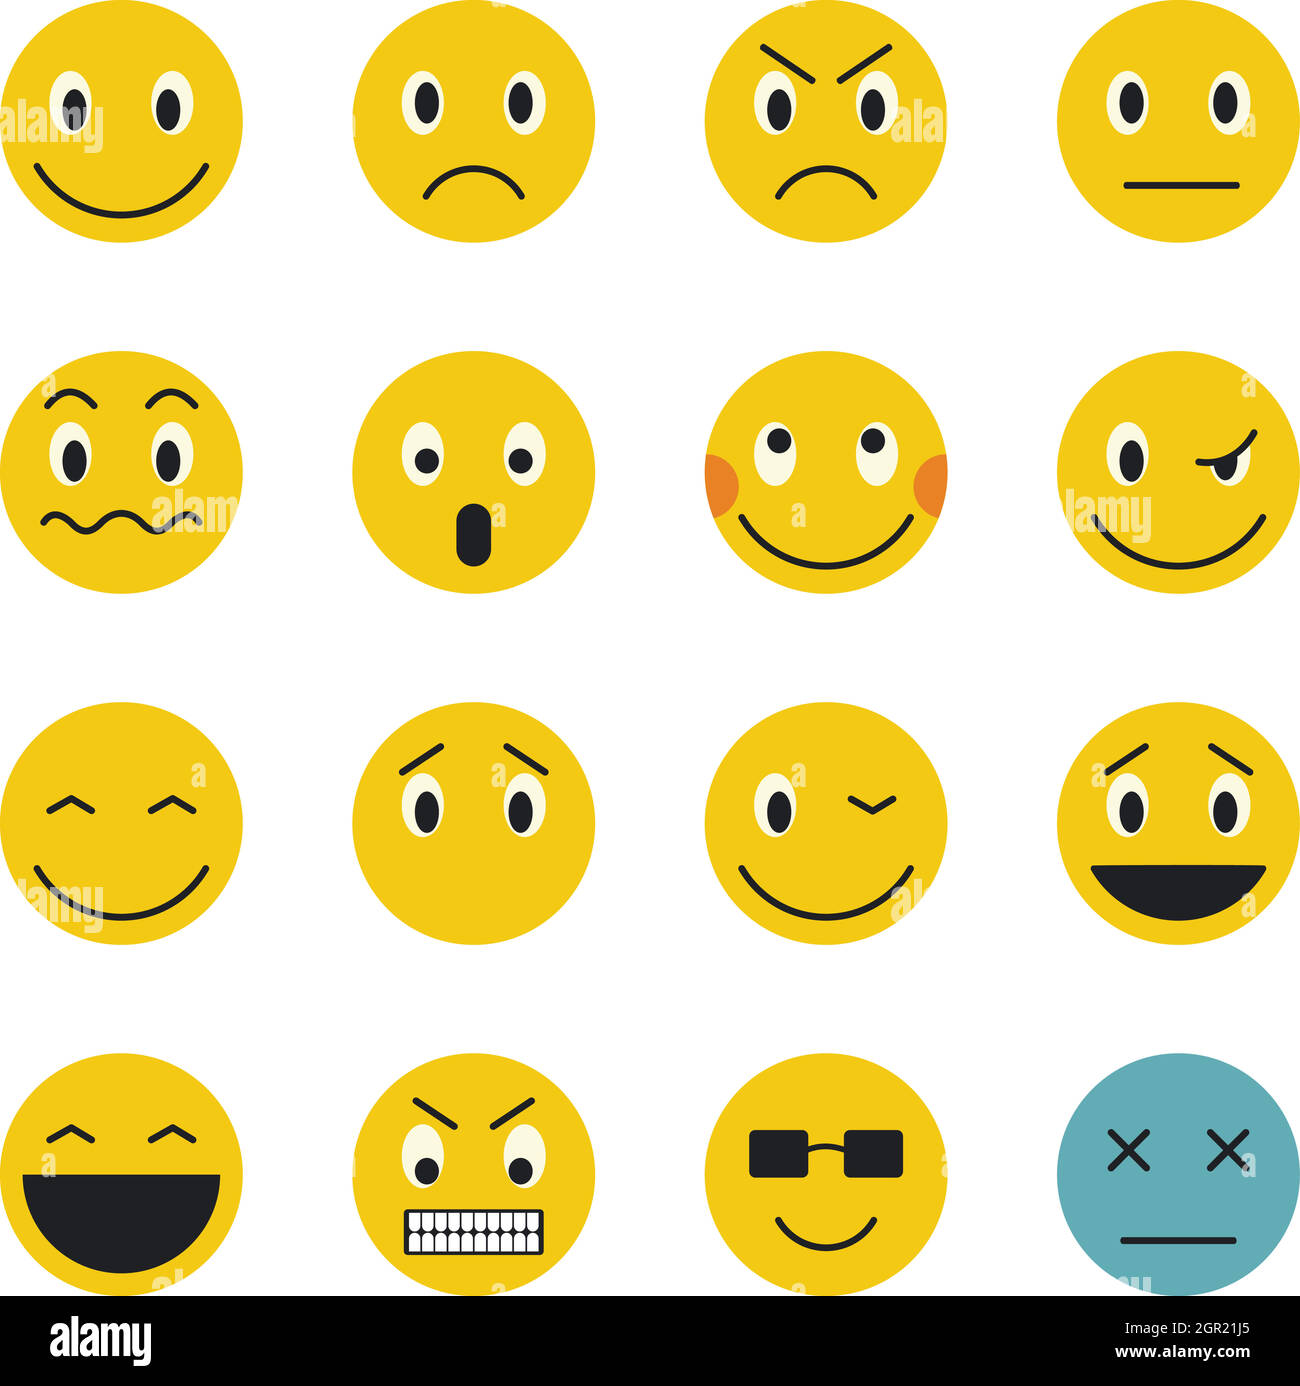 Emoticon icons set, flat style Stock Vector